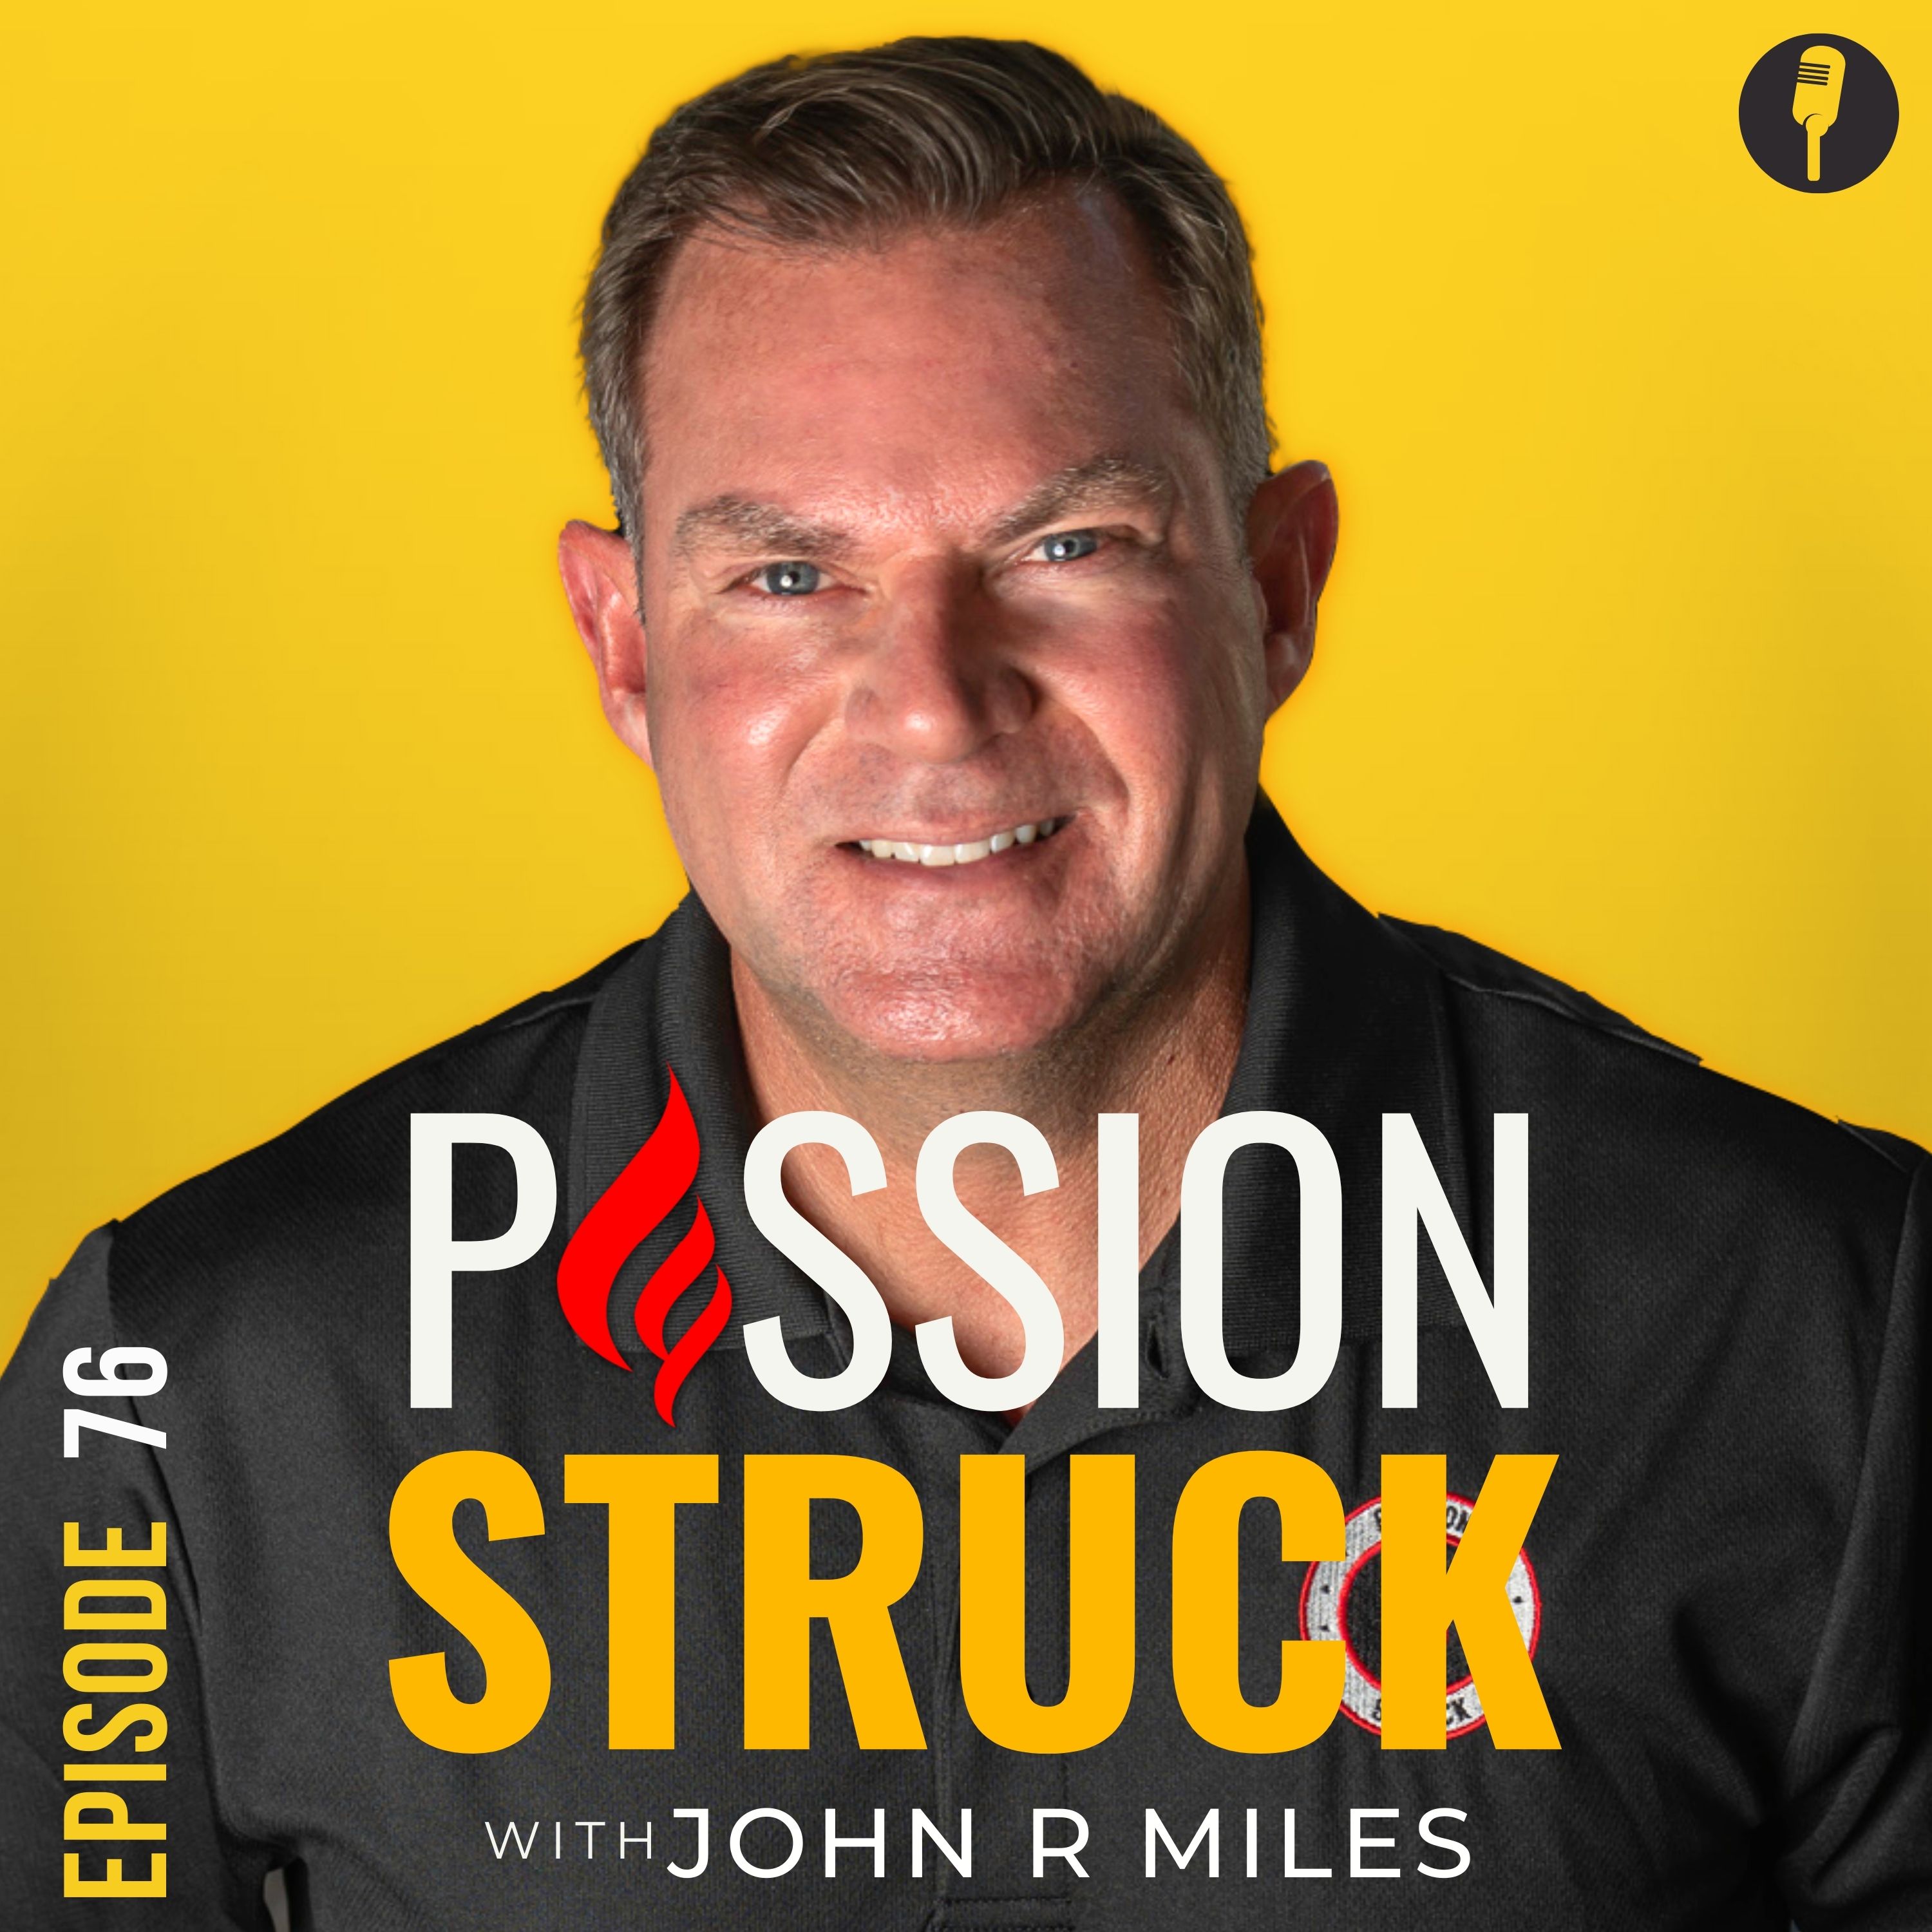 Passion Struck Podcast episode 76 with John R Miles on being resilient